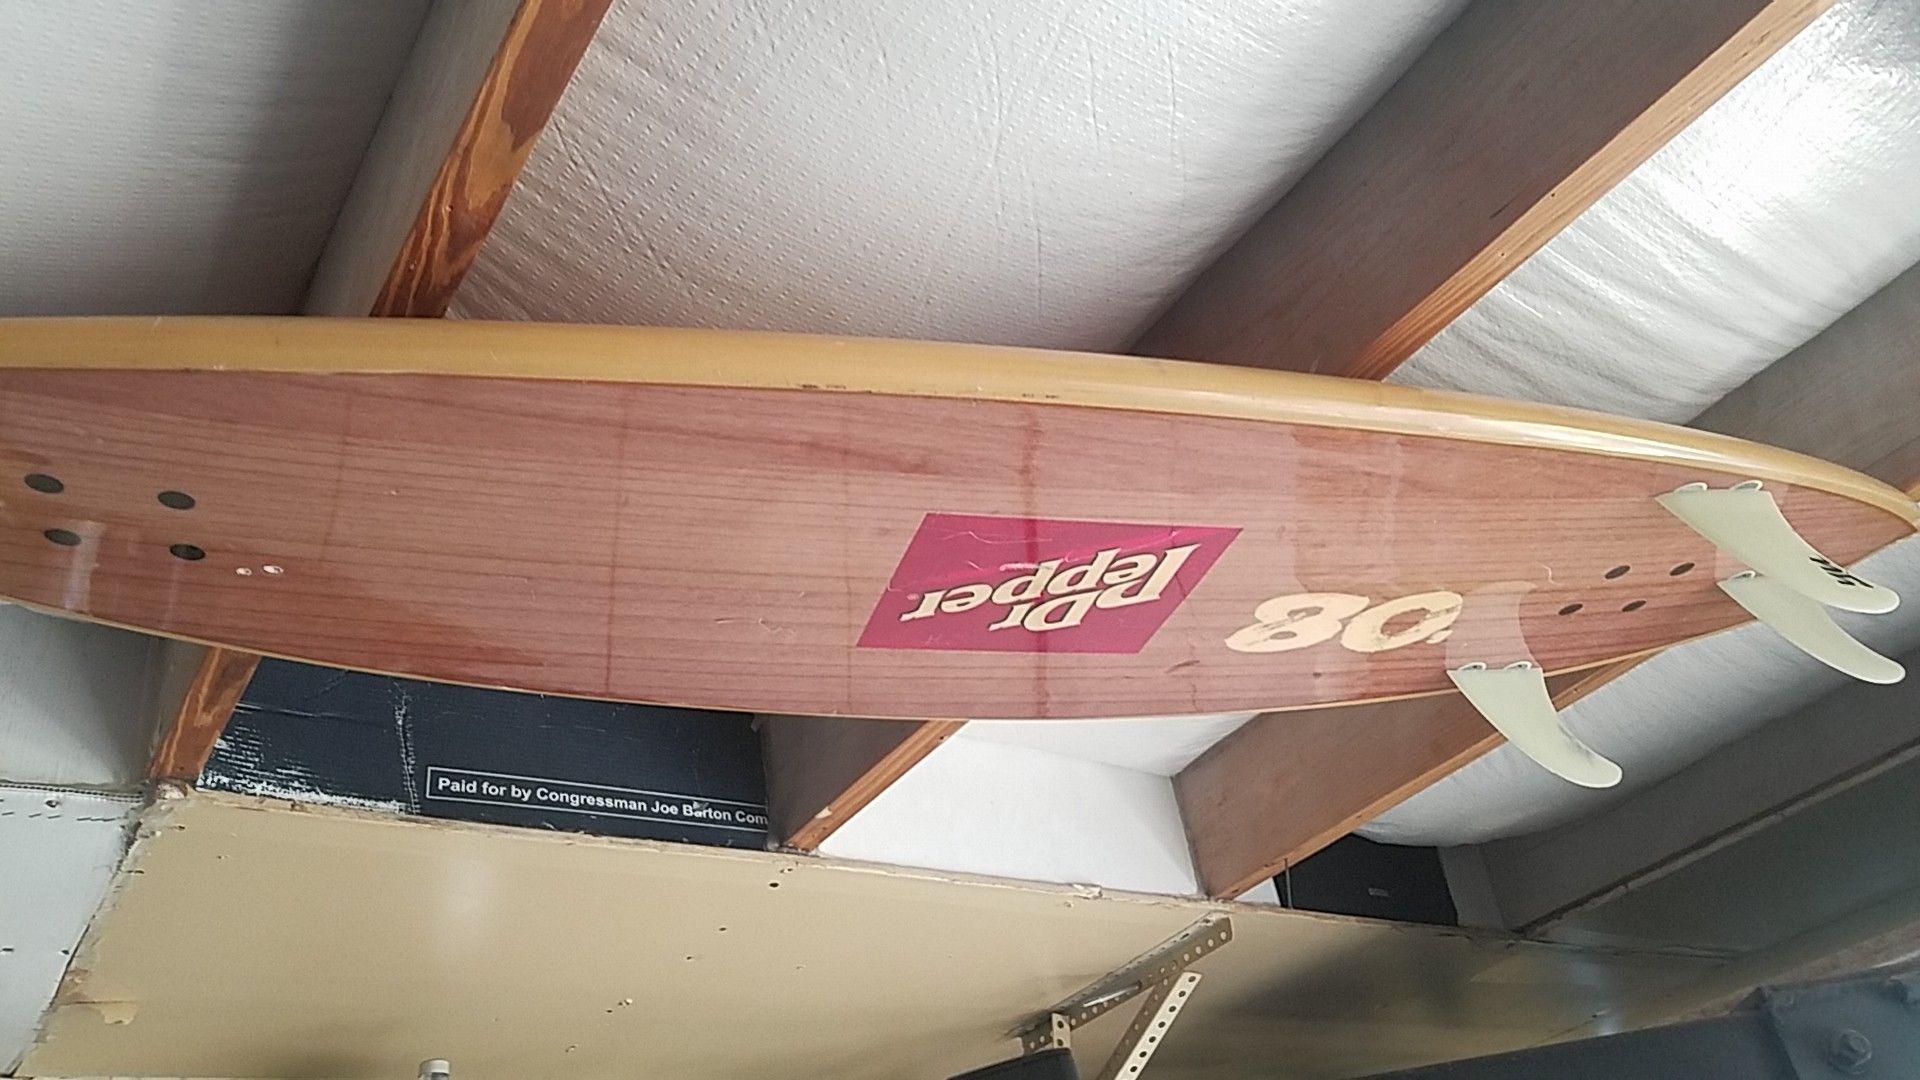 Top of the line surfboard